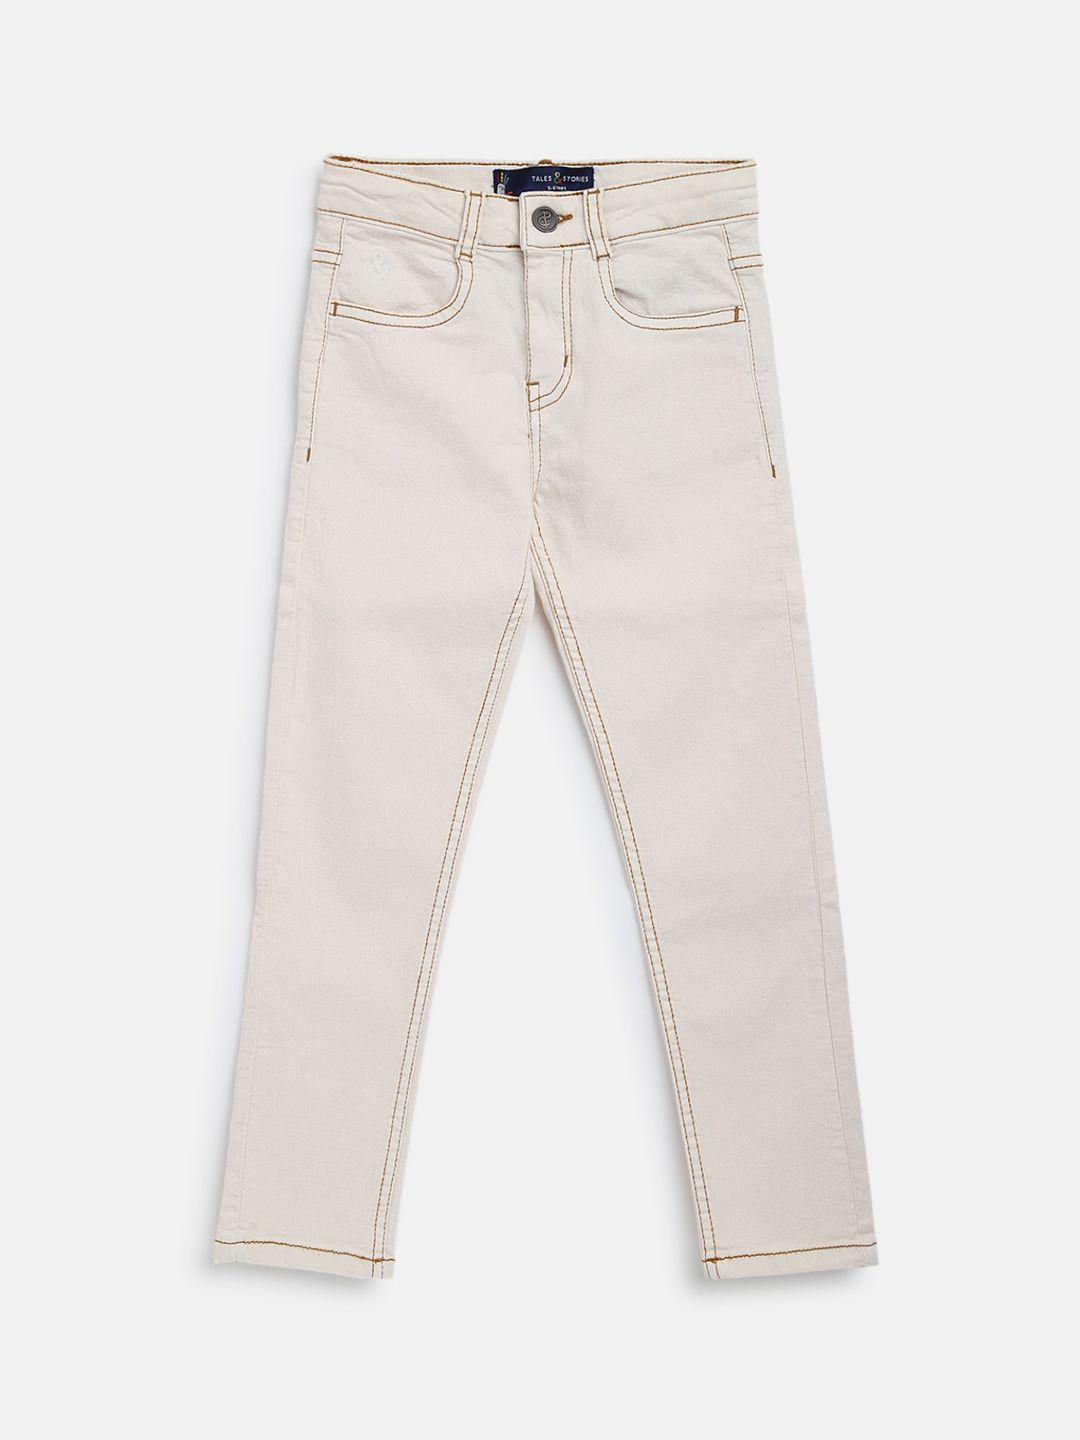 tales-&-stories-boys-cream-coloured-slim-fit-stretchable-jeans